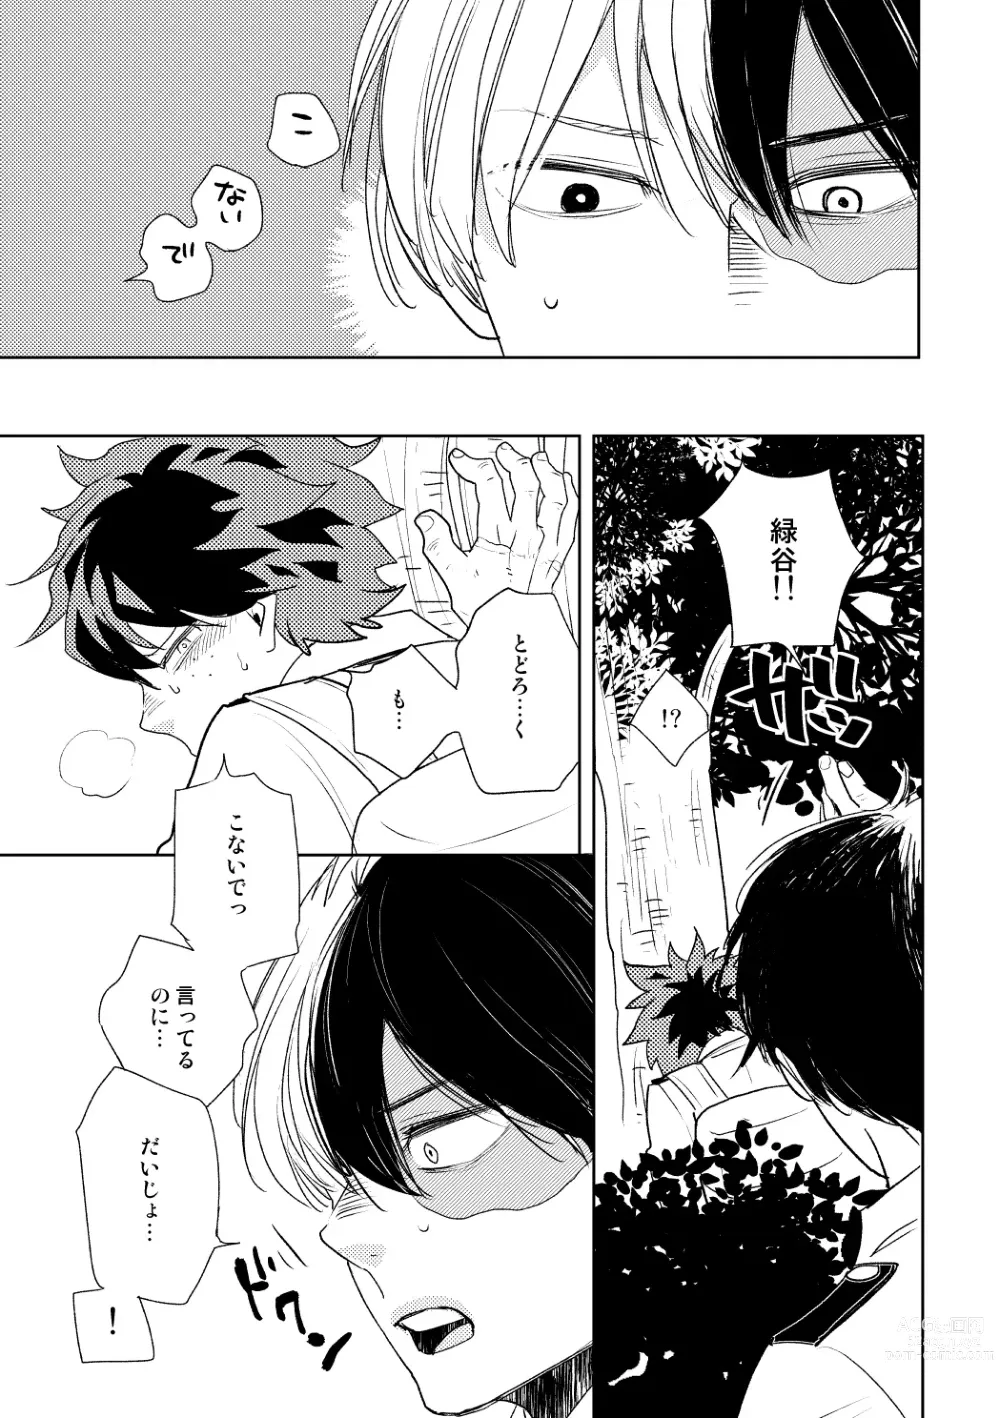 Page 6 of doujinshi DISTANCE